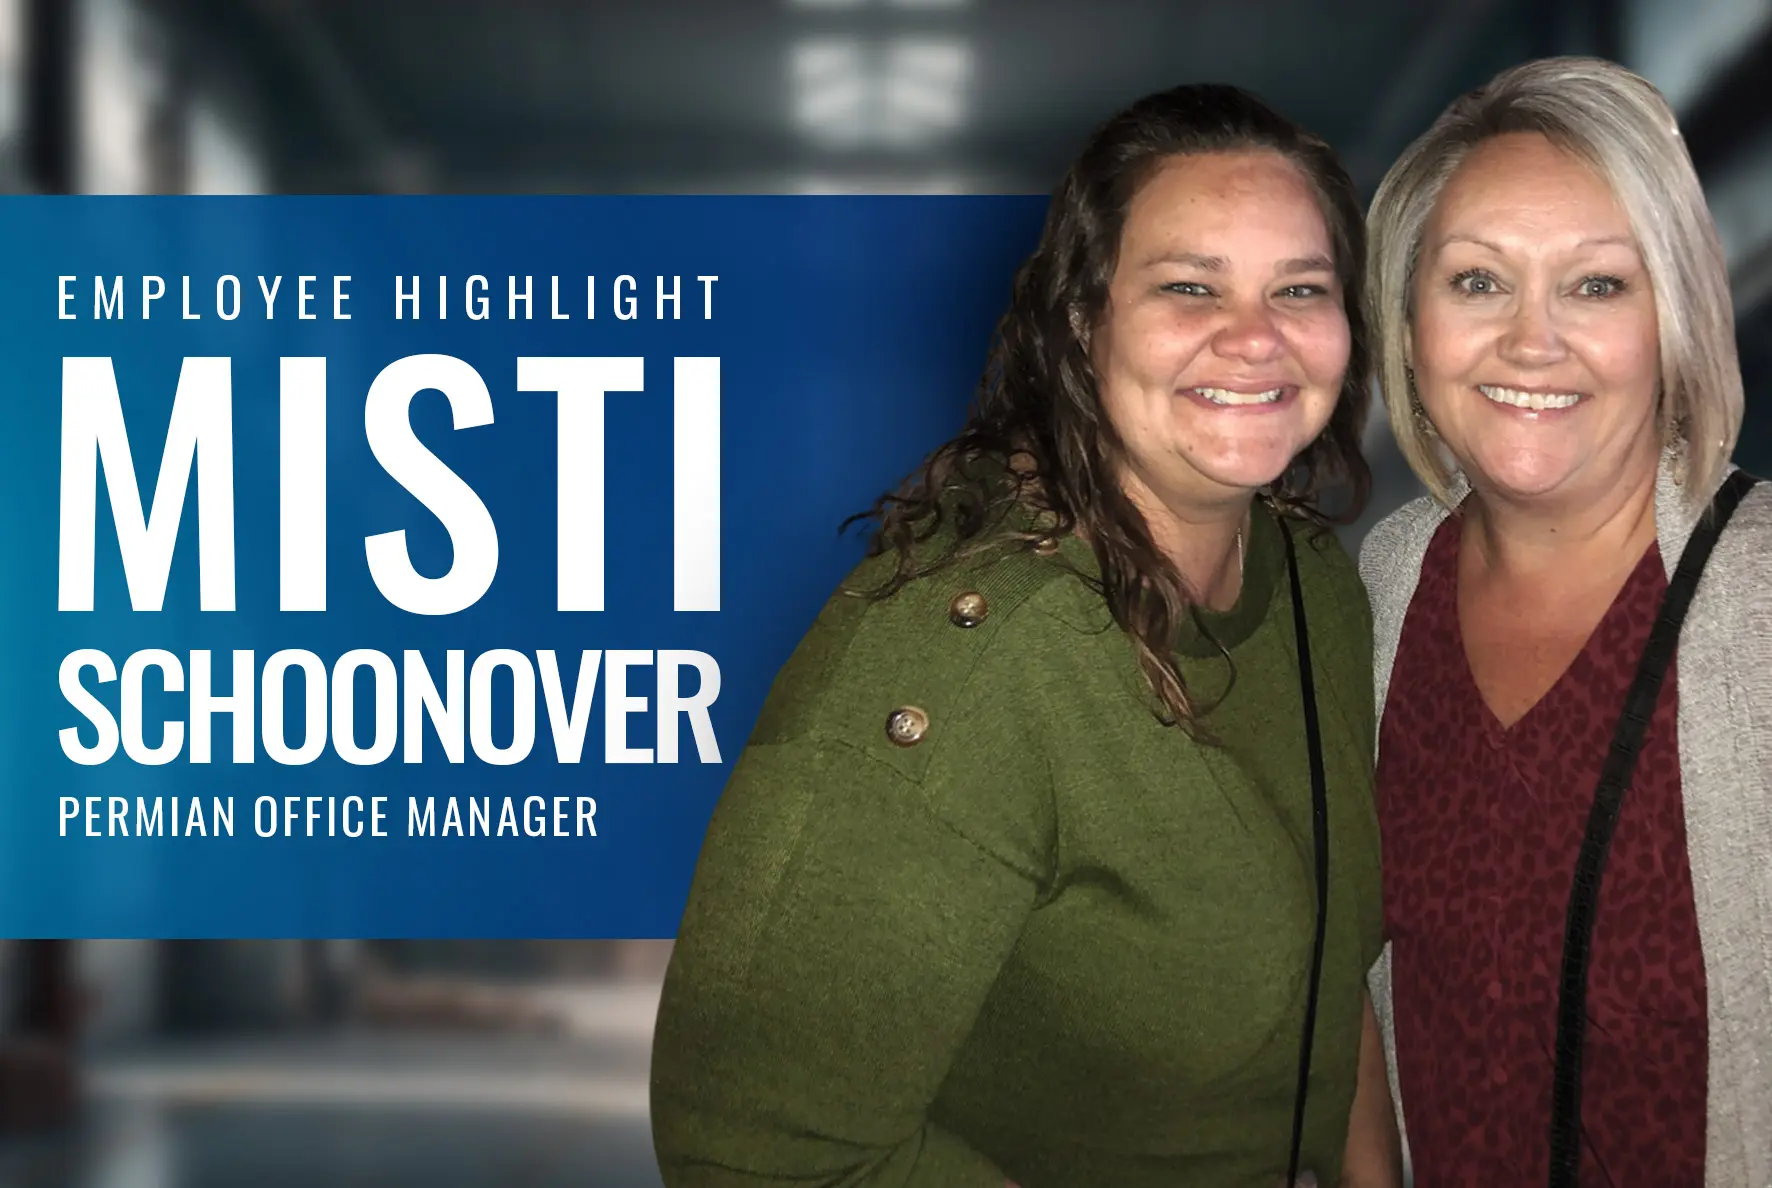 Featured image for “Employee Highlight: Misti Schoonover”